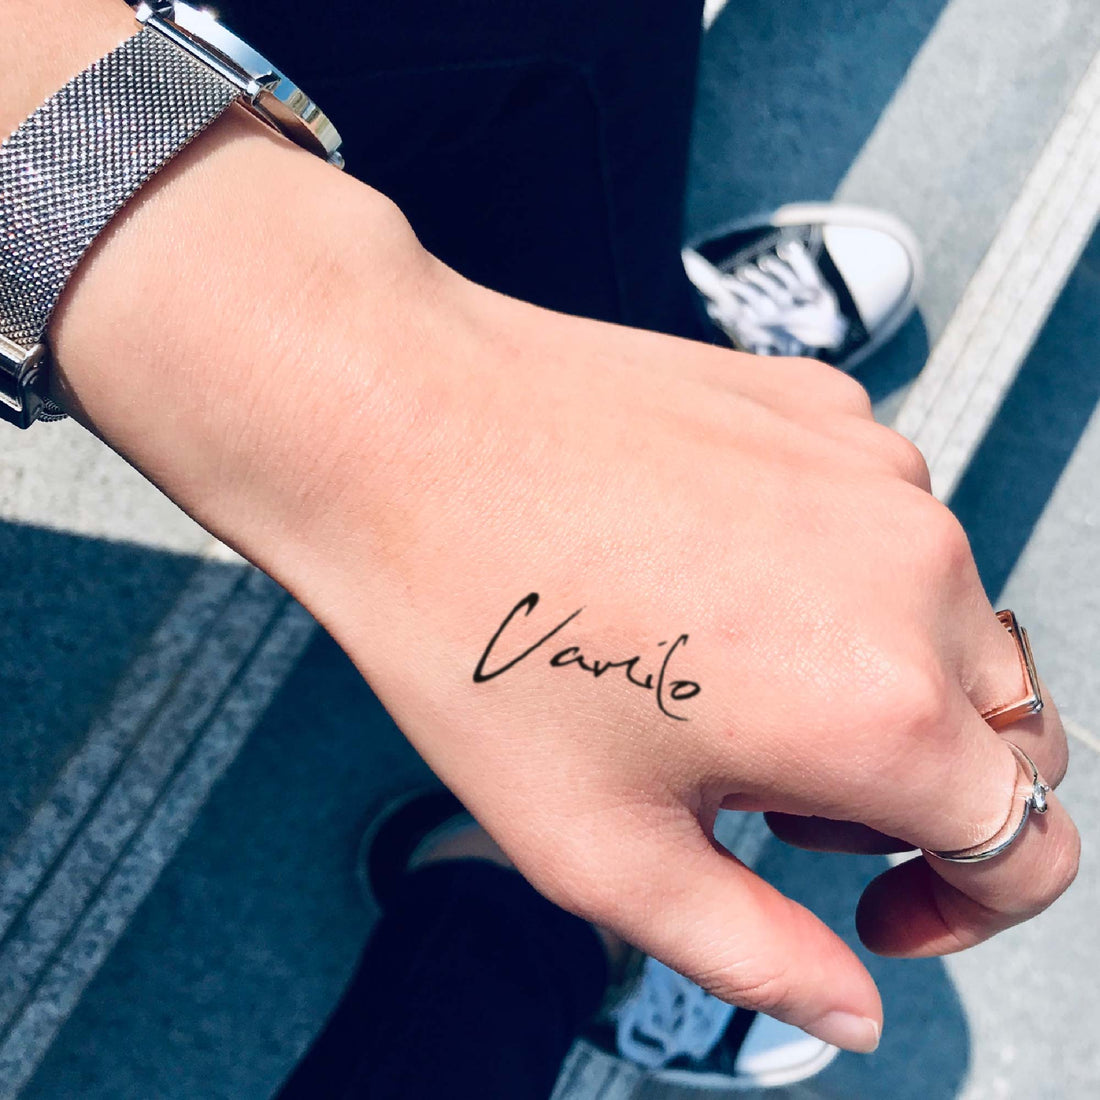 Camilo custom temporary tattoo sticker design idea inspiration meanings removal arm wrist hand words font name signature calligraphy lyrics tour concert outfits merch accessory gift souvenir costumes wear dress up code